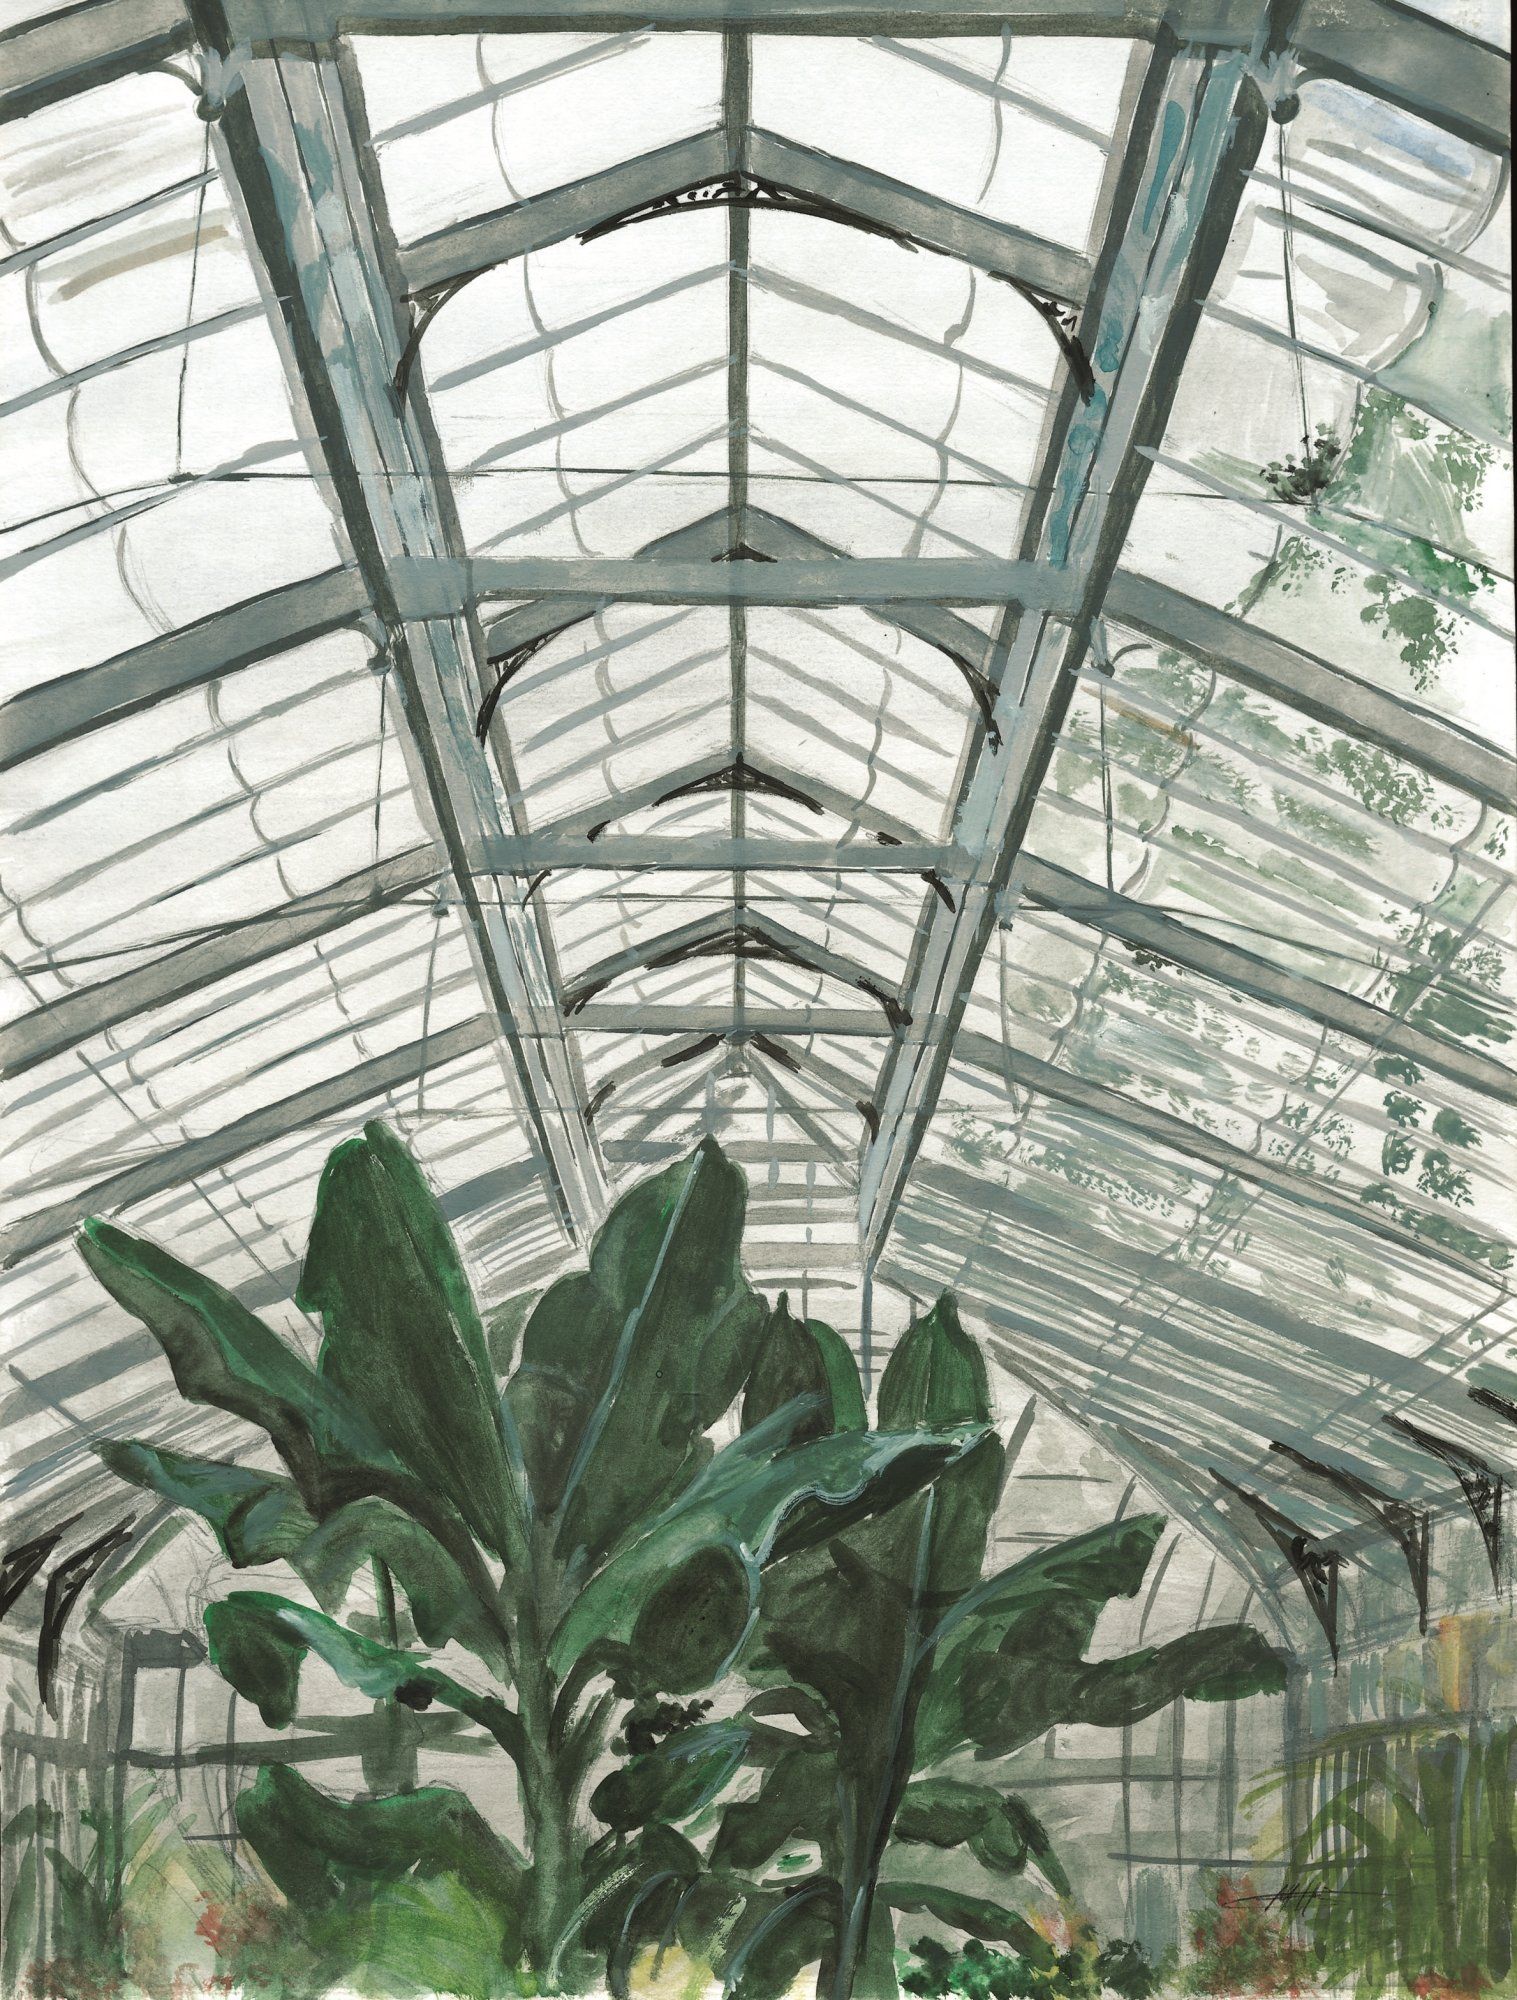 The Conservatory in 1987 - painting by Melissa Glass - (Melissa's brother, Marc Harris, is one of the musicians who occasionally play in the Conservatory)